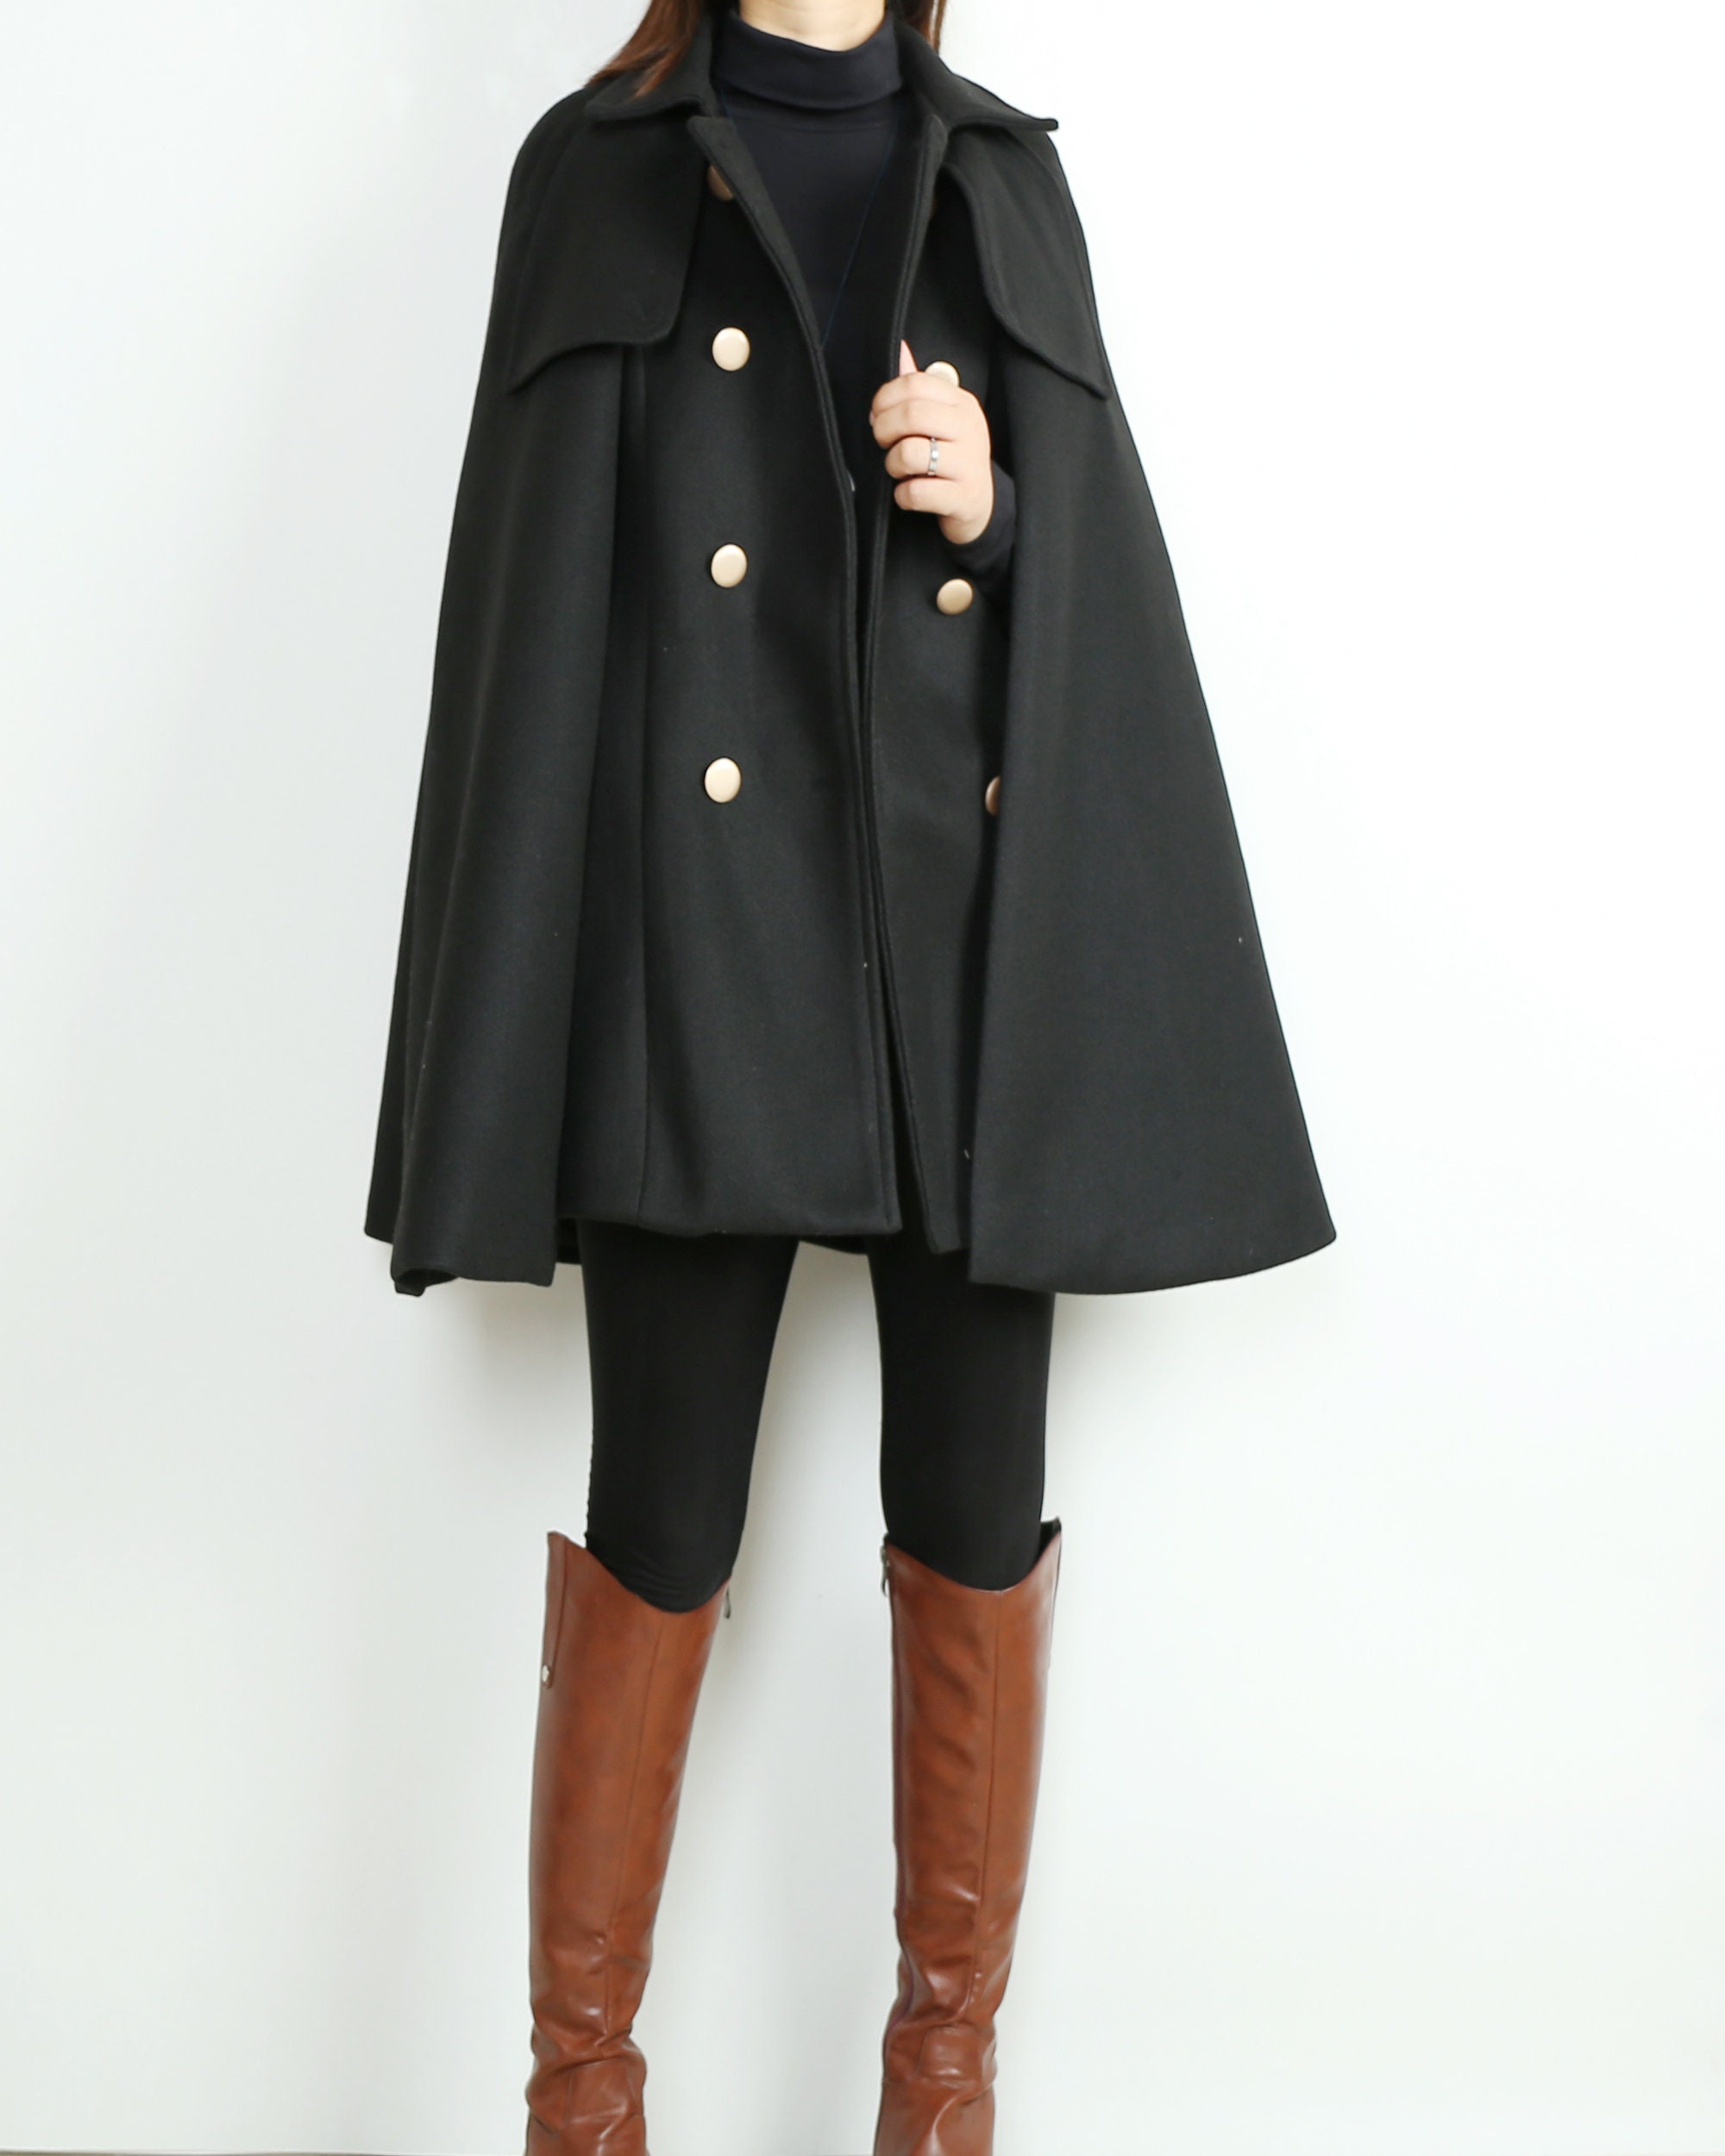 Whitive Women Button-up Woolen Caftan Poncho Baggy Style Trench Coat Jacket